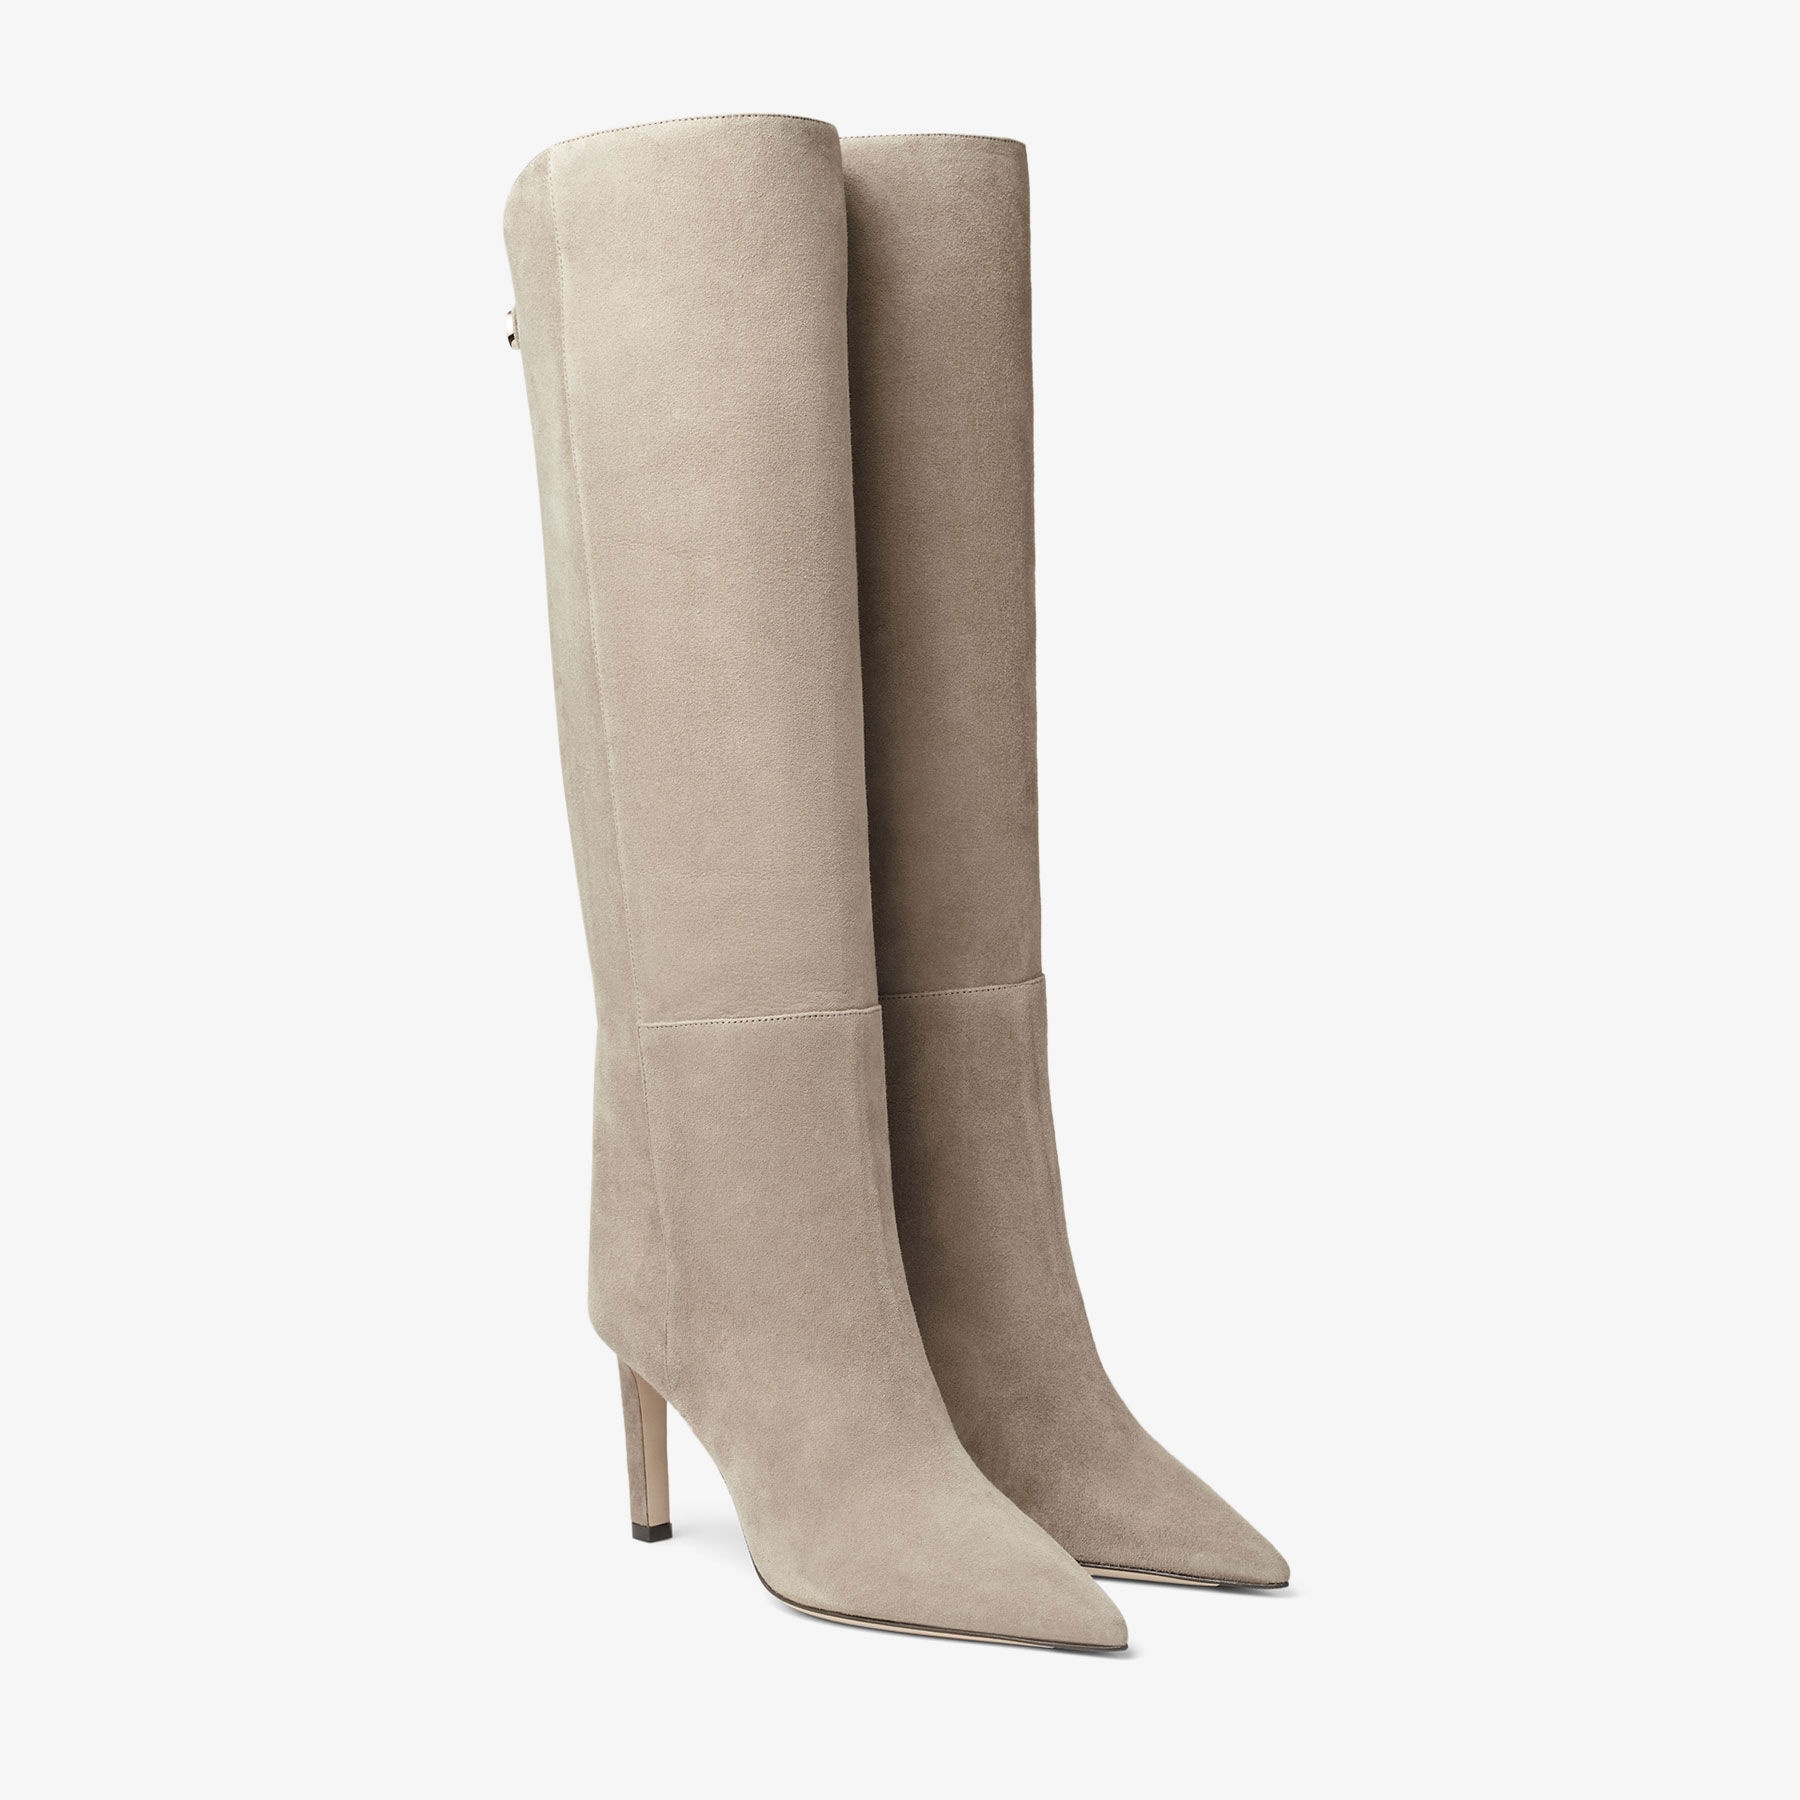 Alizze Knee Boot 85
Taupe Suede Knee-High Boots - 3